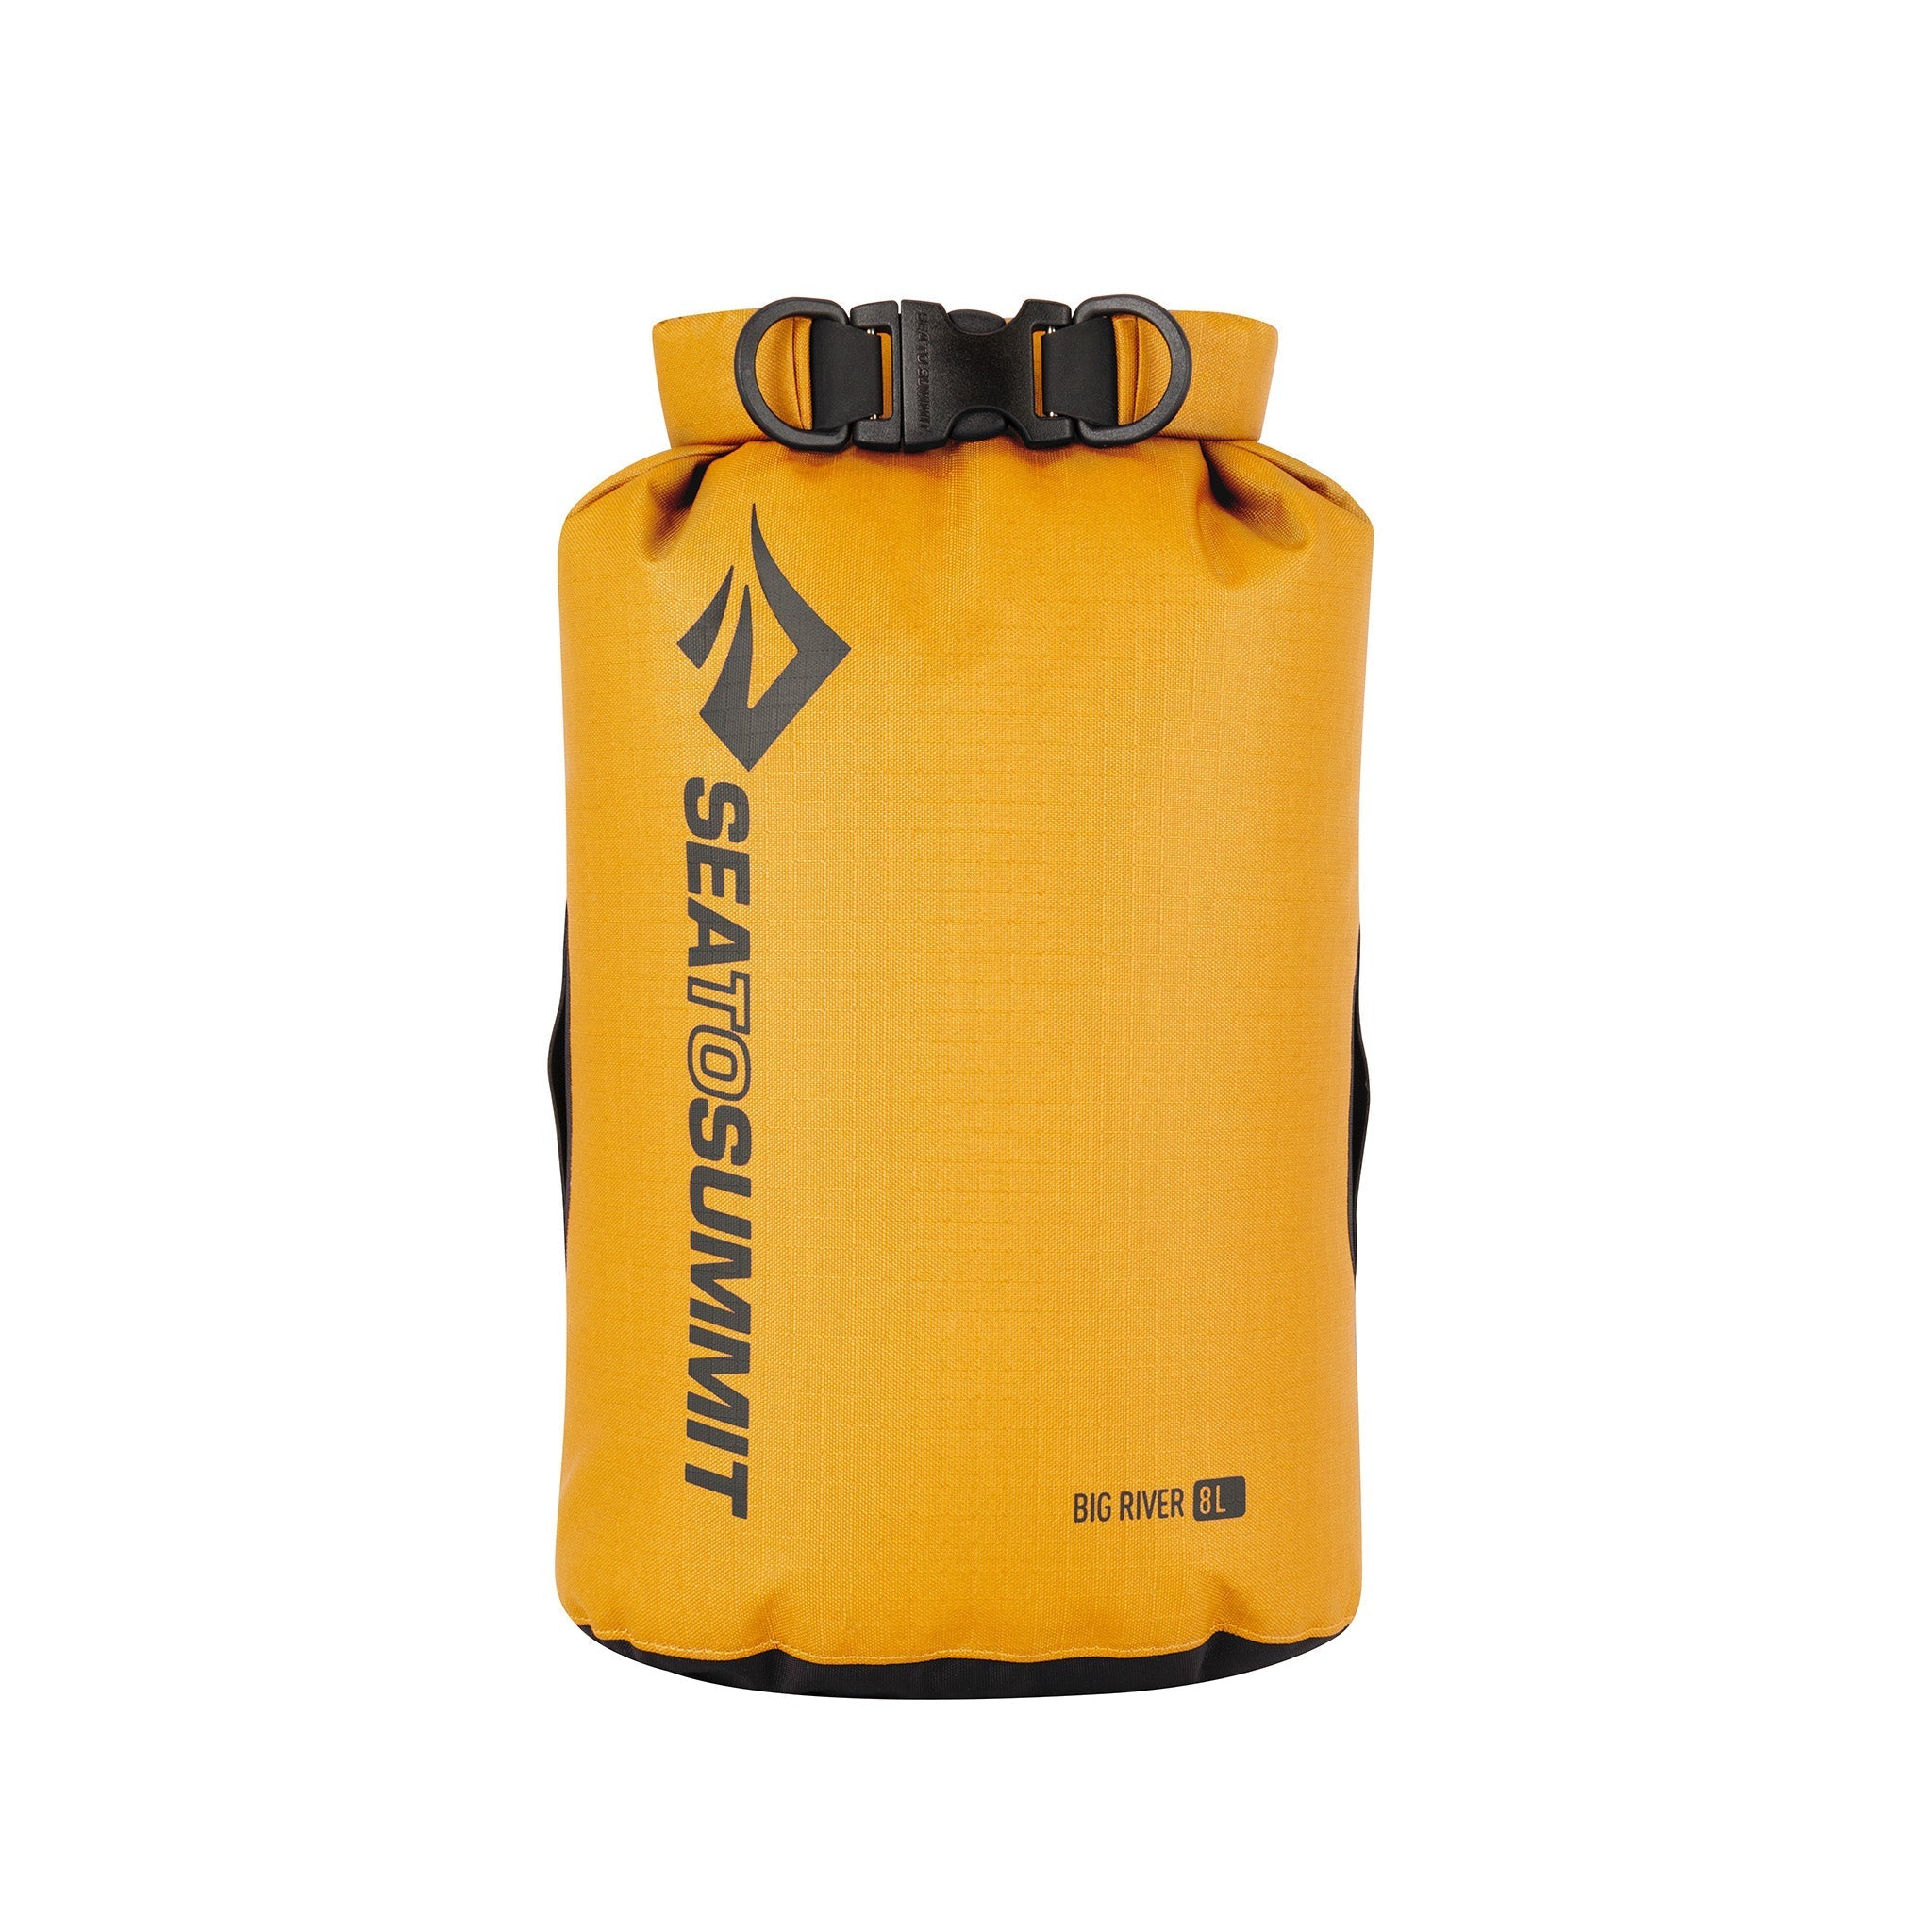 8 litre / Yellow || Big River Dry Bag in Yellow